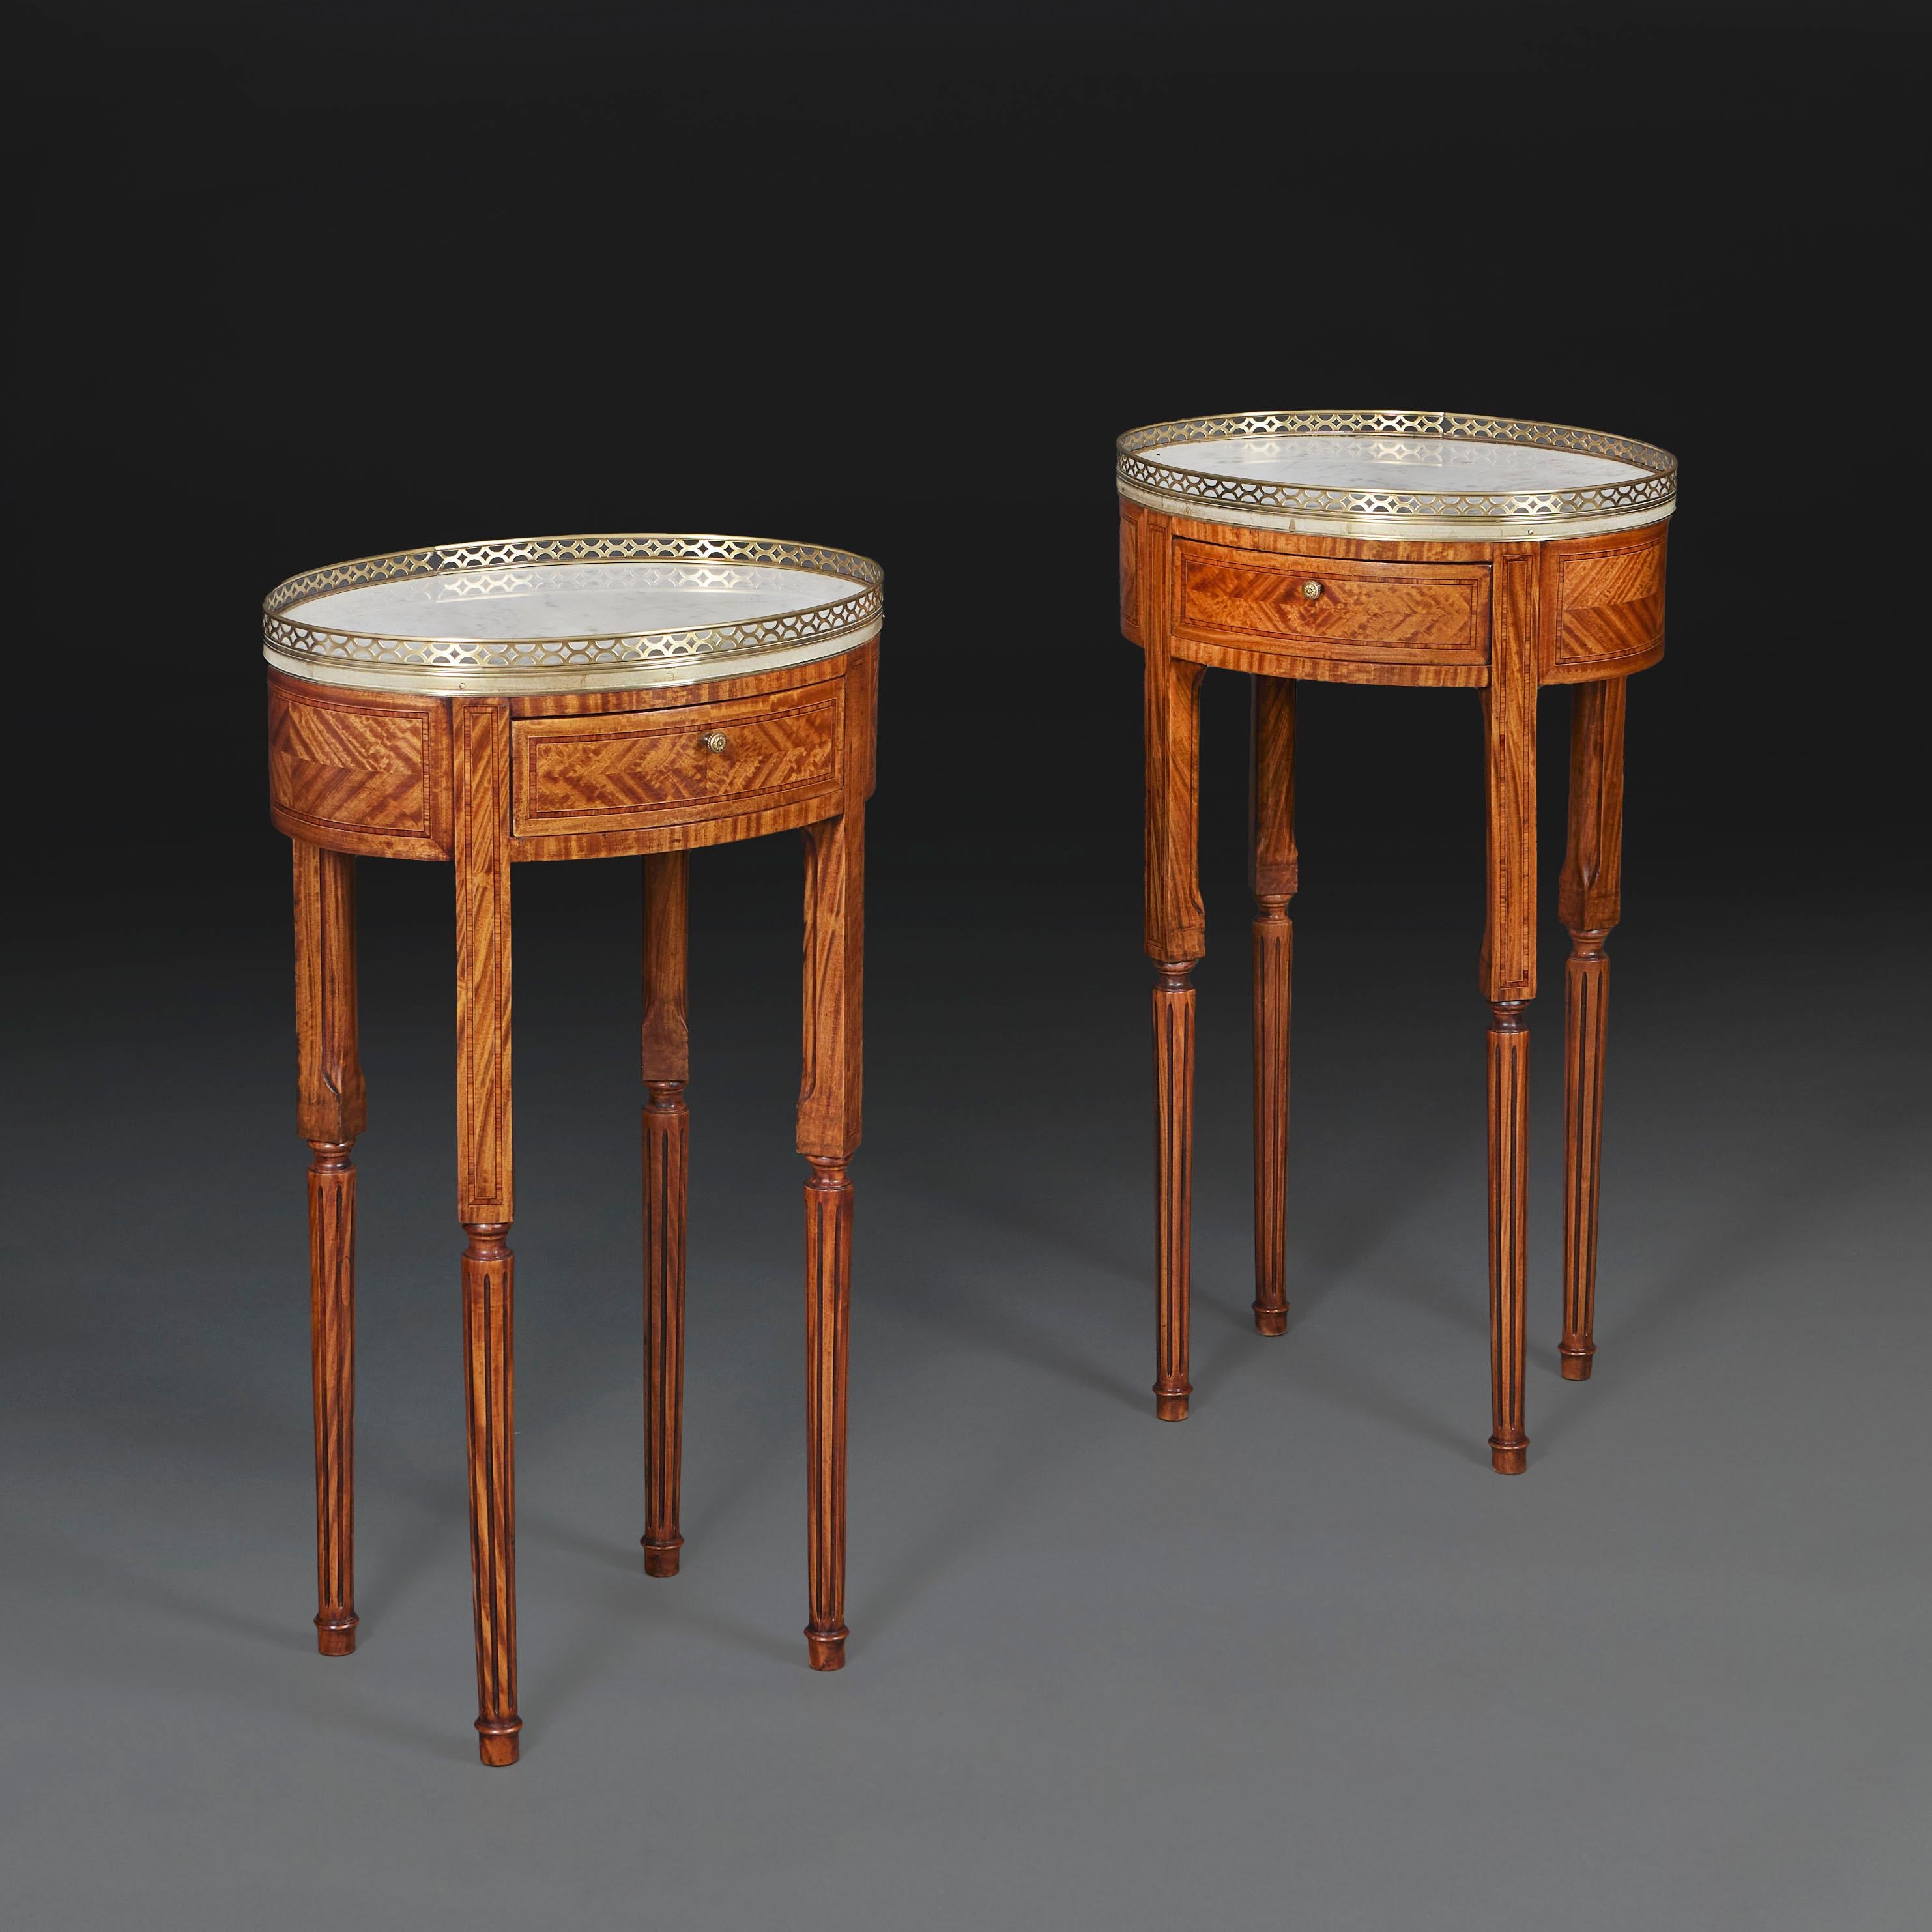 France, circa 1850

A fine pair of nineteenth century Harewood and rosewood occasional tables of oval form, in Louis XVI style, with Carrara marble inset and brass galleried tops, with single drawer to the frieze and supported on tapering